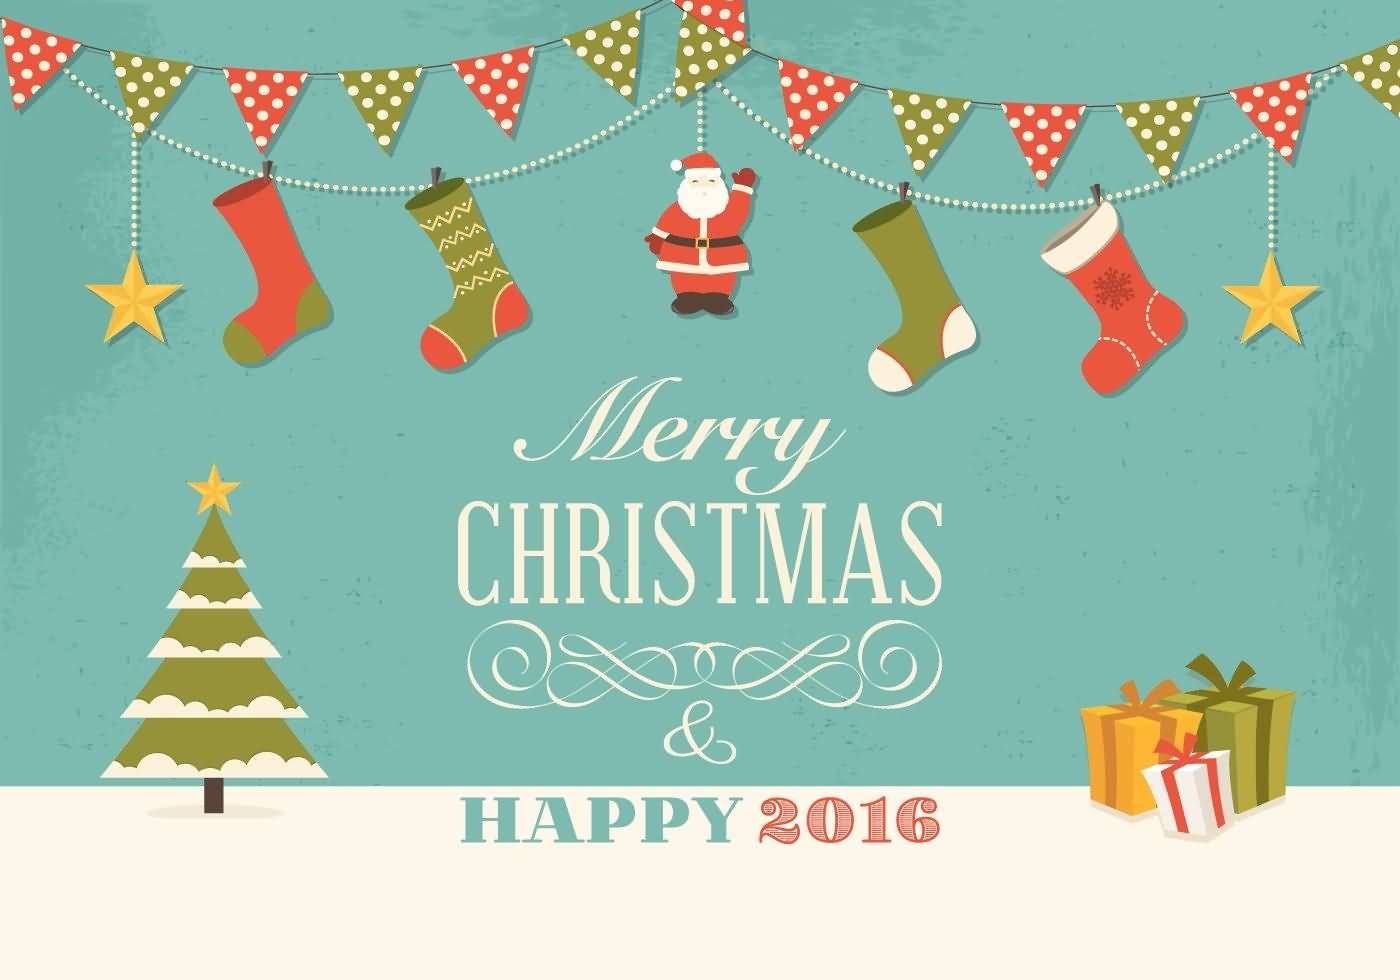 Merry Christmas Cards Vector Image Picture Photo Wallpaper 03